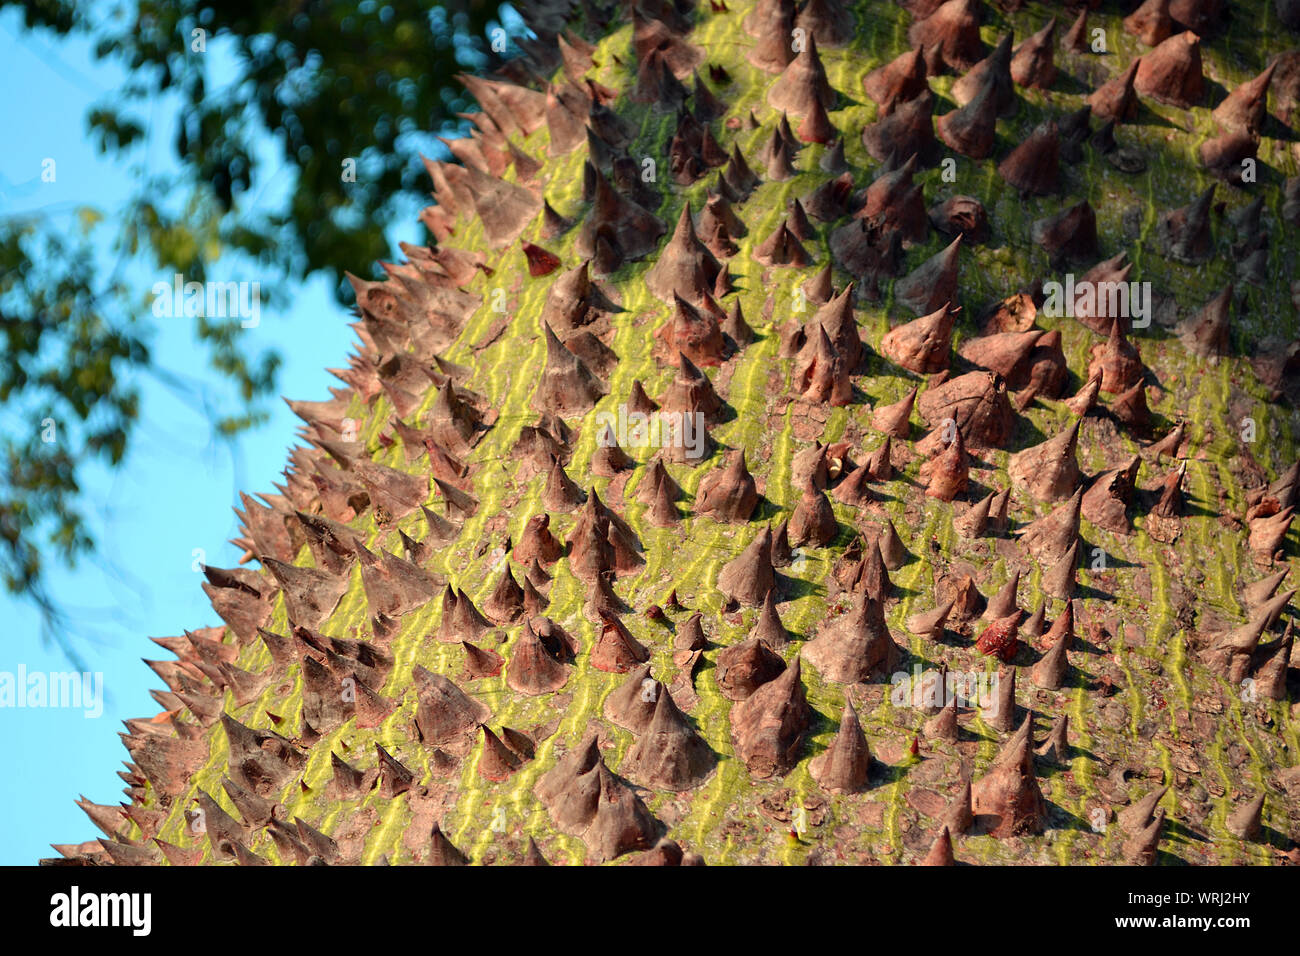 The surface of the Ceiba speciosa (or Chorisia speciosa) tree trunk with many spikes on it, selective focus Stock Photo